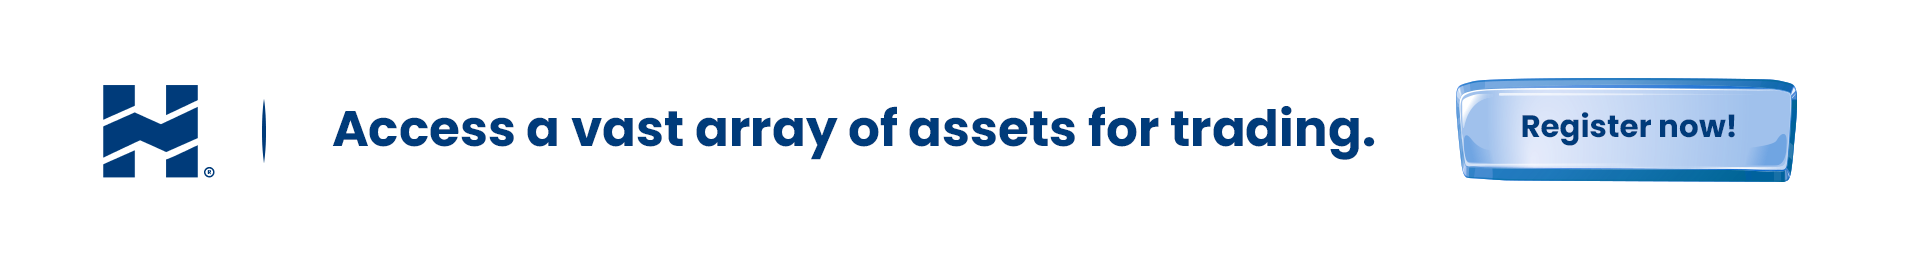 Access a vast array of assets for trading